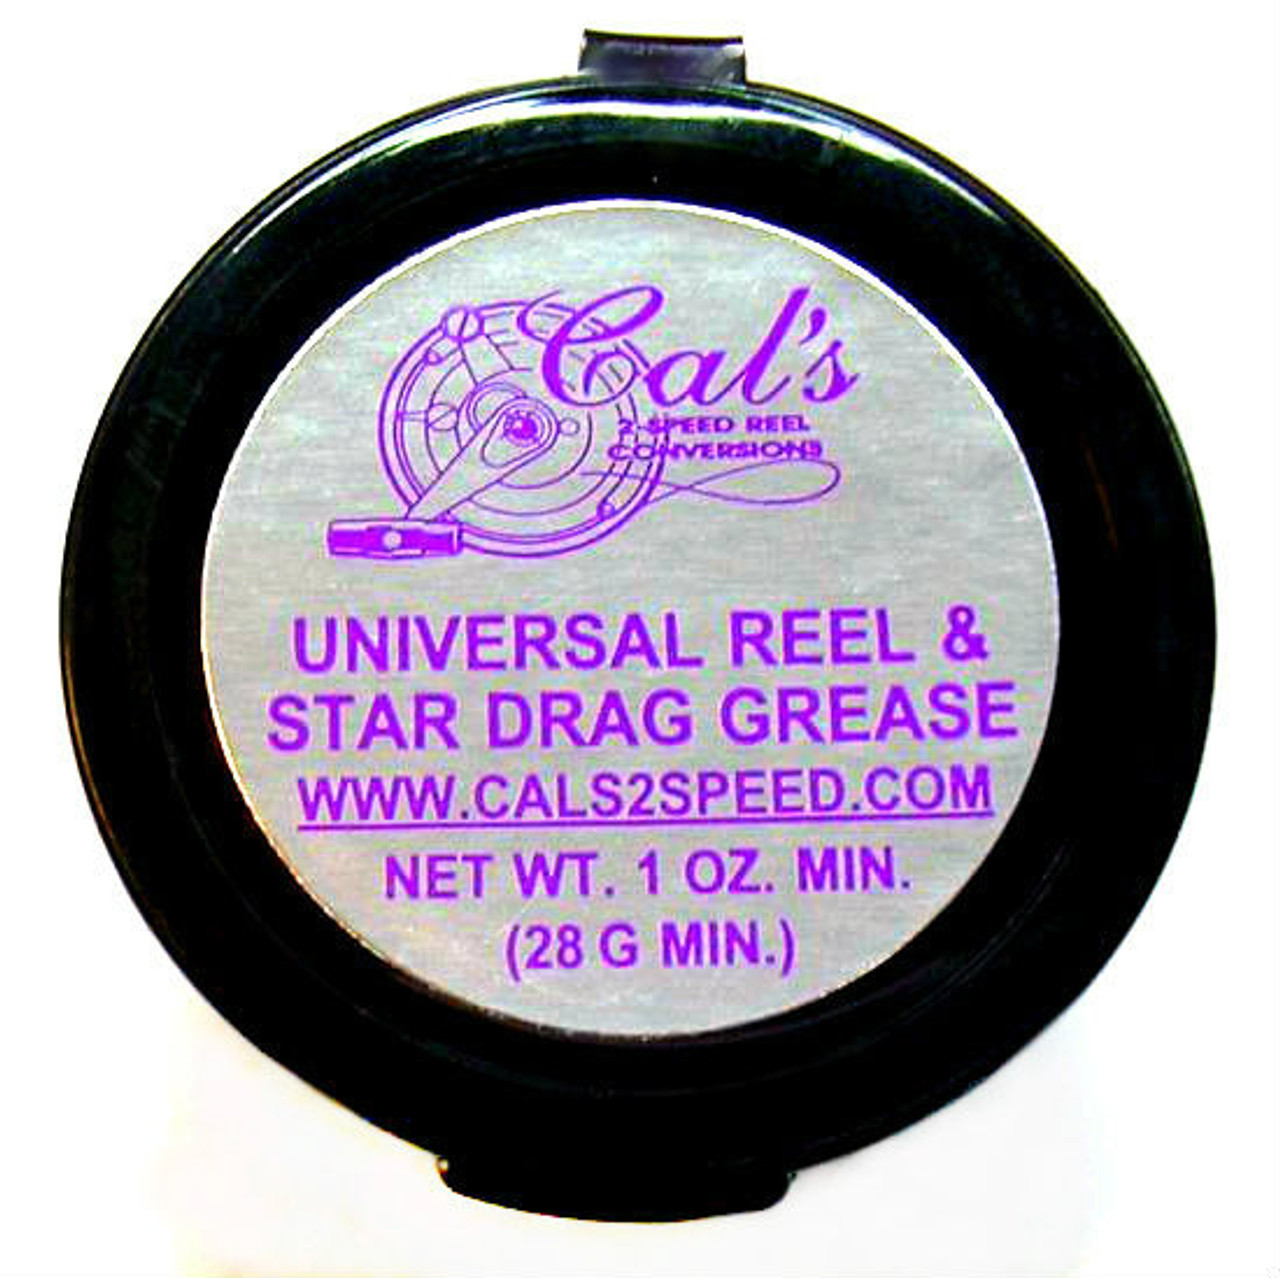  Cal's Universal Reel and Star Drag Grease - Multi Use